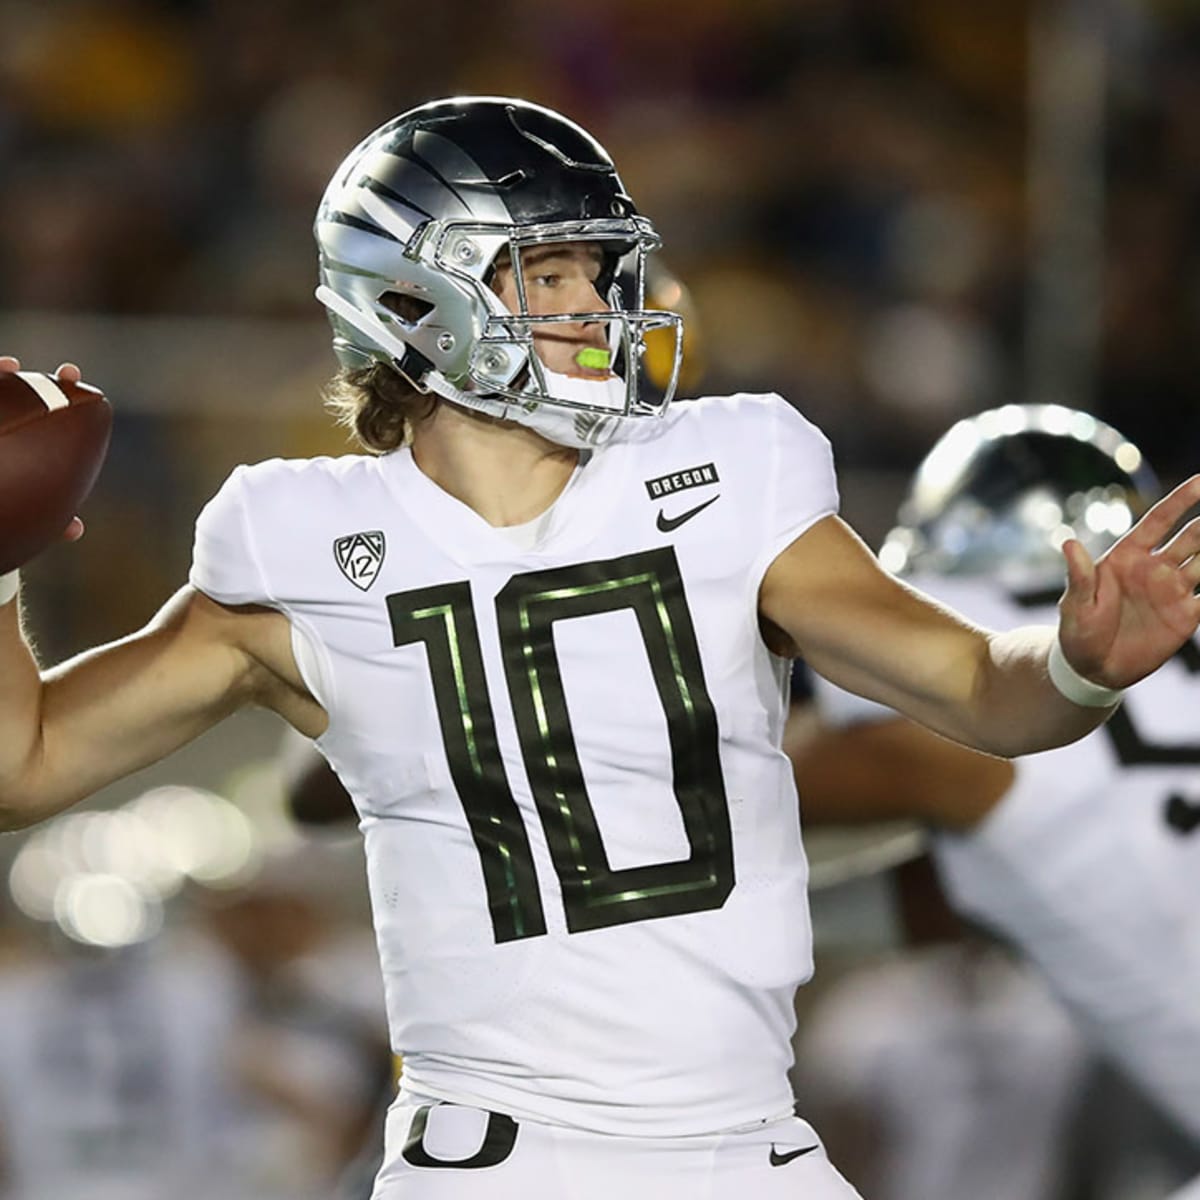 For Oregon's Justin Herbert, the 2018 season is unlike any other